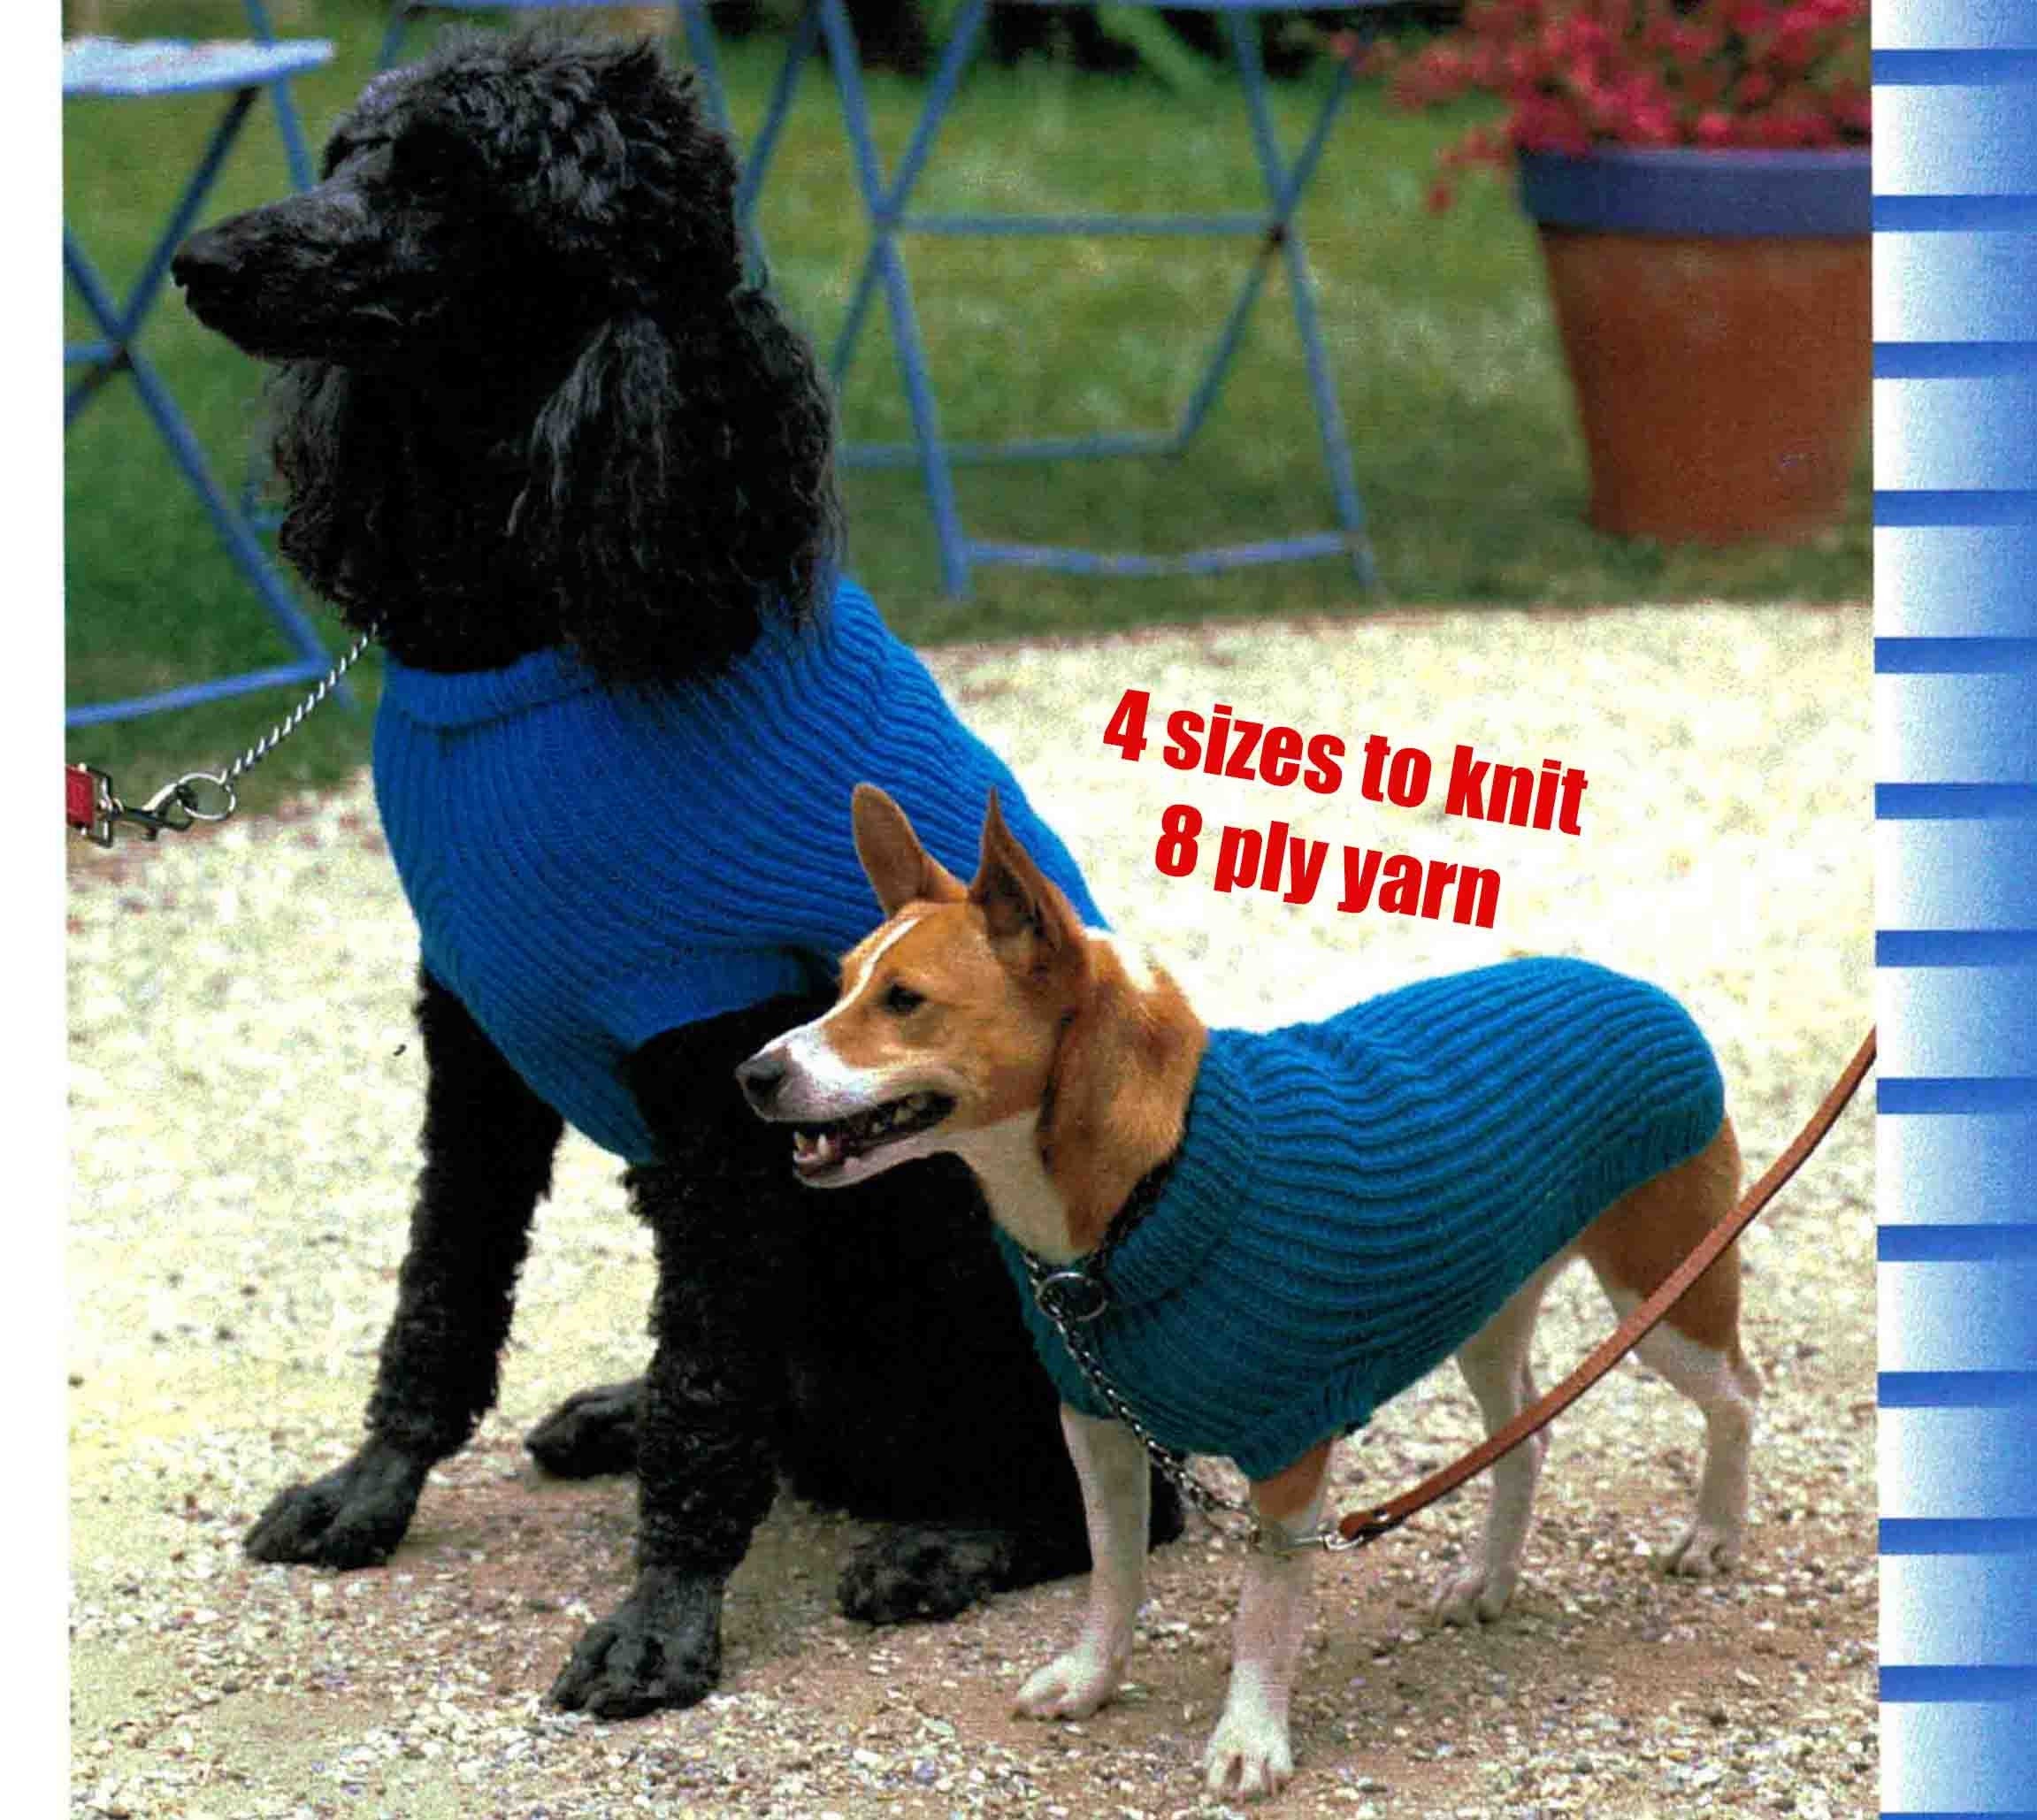  Jecikelon Small Knitted Dog Sweater Warm Puppy Winter Clothes  Doggie Pullover Sweaters Pet Knitwear (Navy1, Small) : Pet Supplies